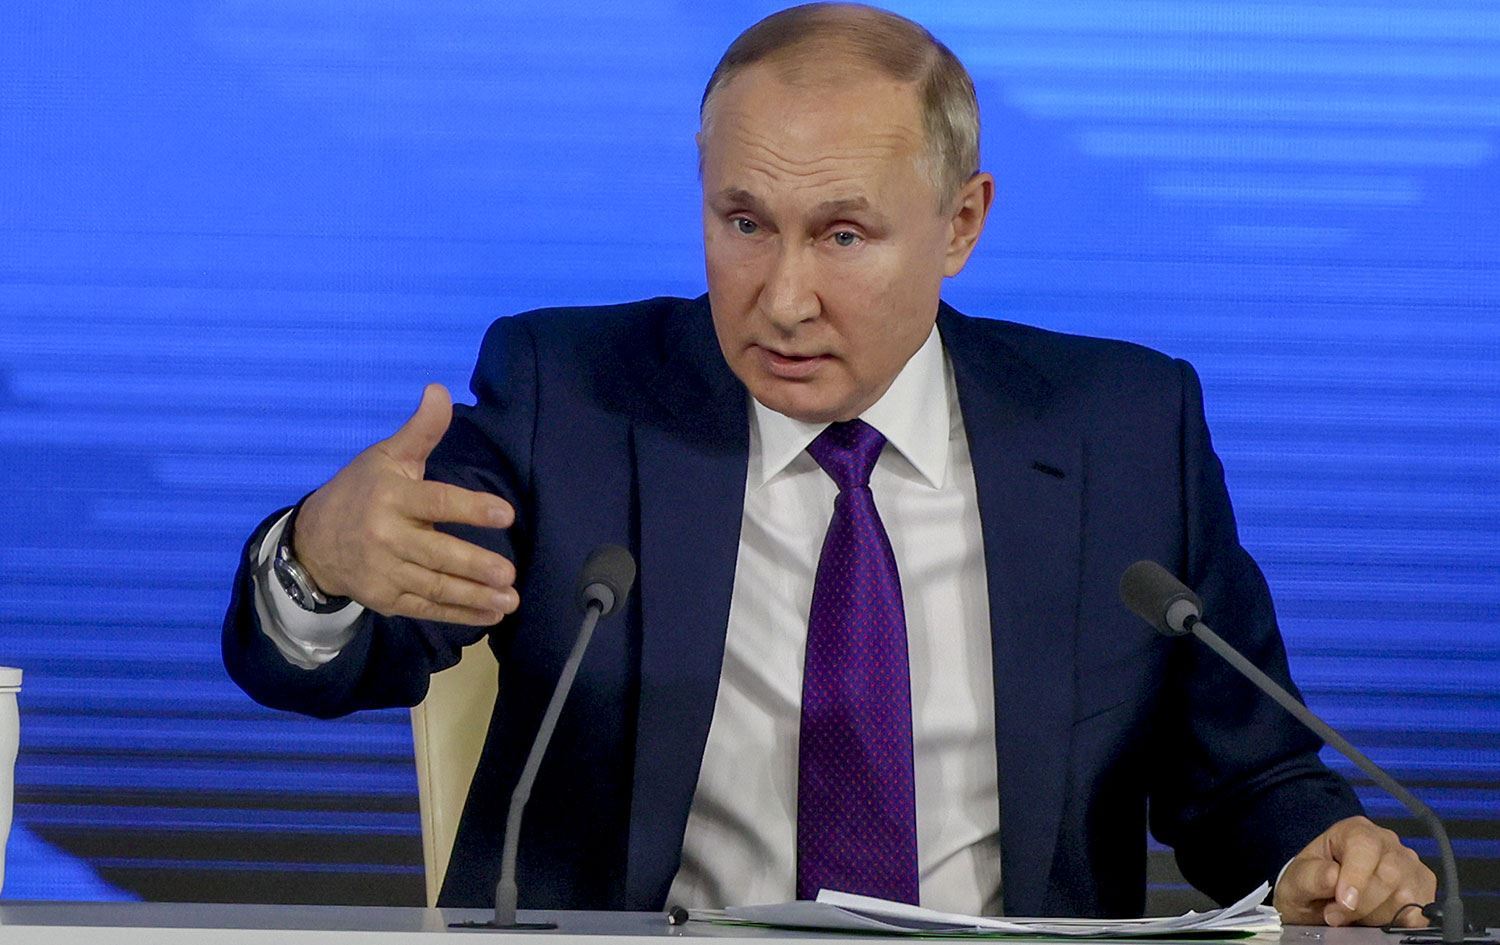 Putin made statements about Russia's iron-steel industry